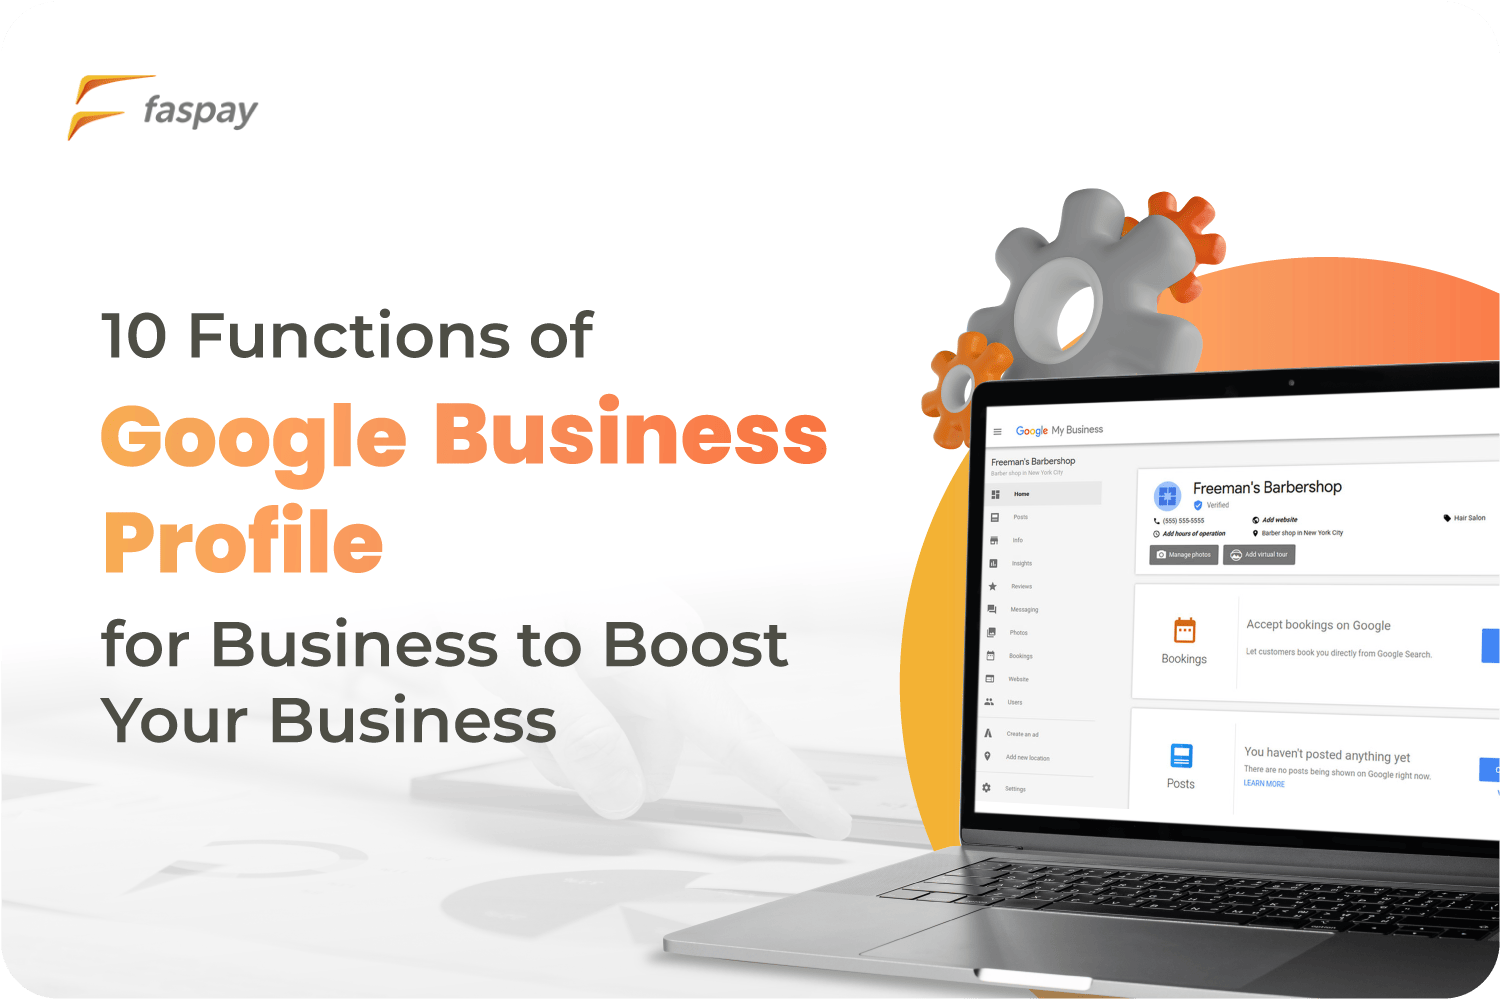 Functions of Google Business Profile